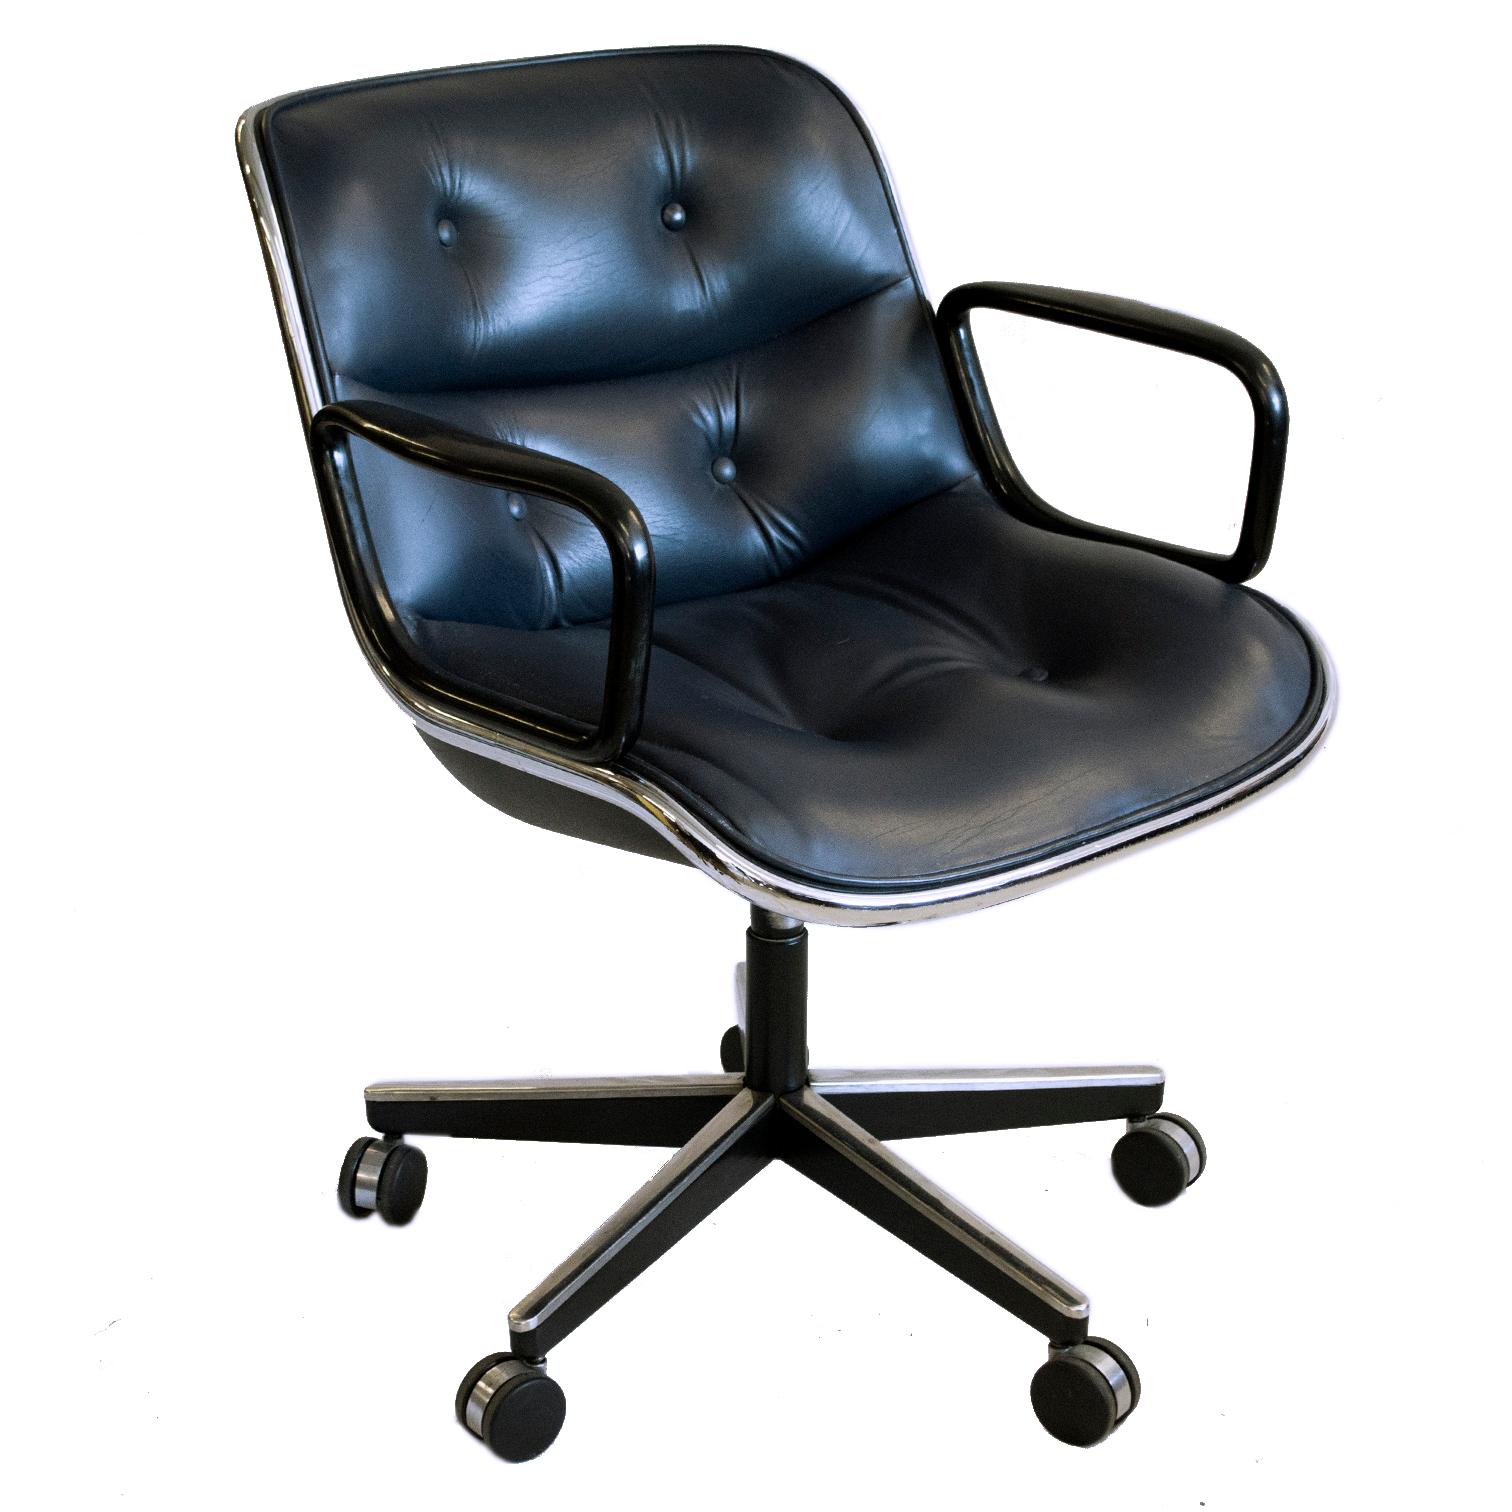 Offering the classic Pollock Executive Chair in its original black leather, steel frame and vintage 4-star base, in very good condition.

Charles Pollock was a master of design who’s work was supported by Florence Knoll and her company, Knoll.